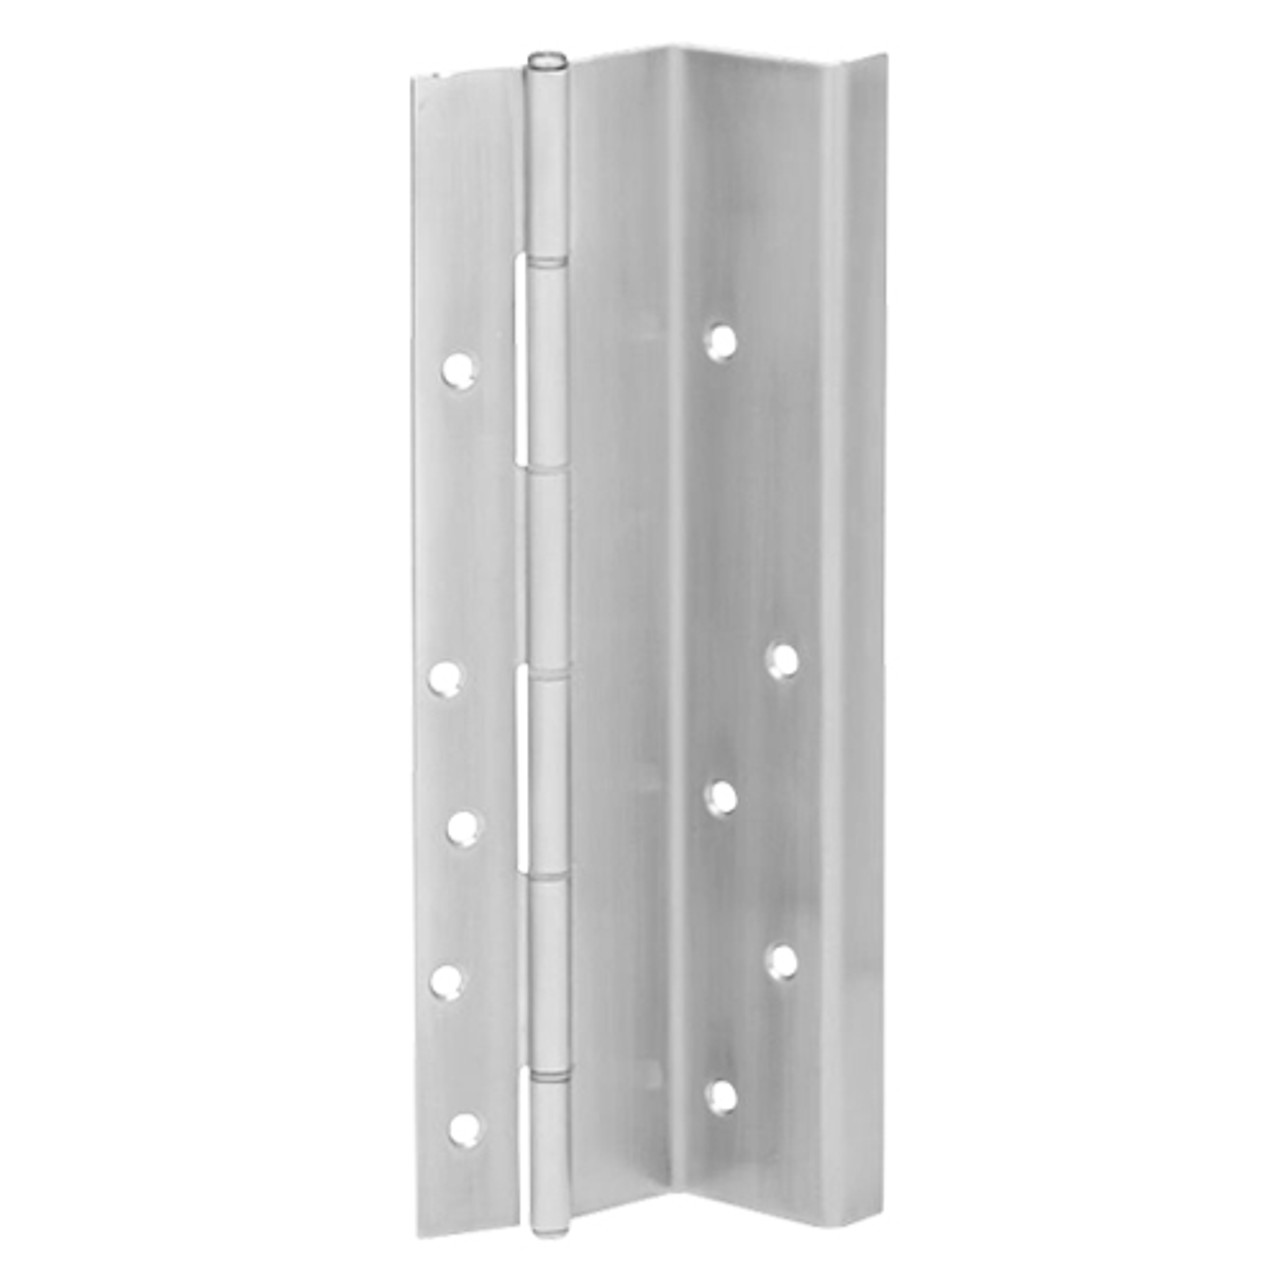 611-USP-85-WD IVES Swing Clear Pin and Barrel Continuous Hinges in Primed for Paint